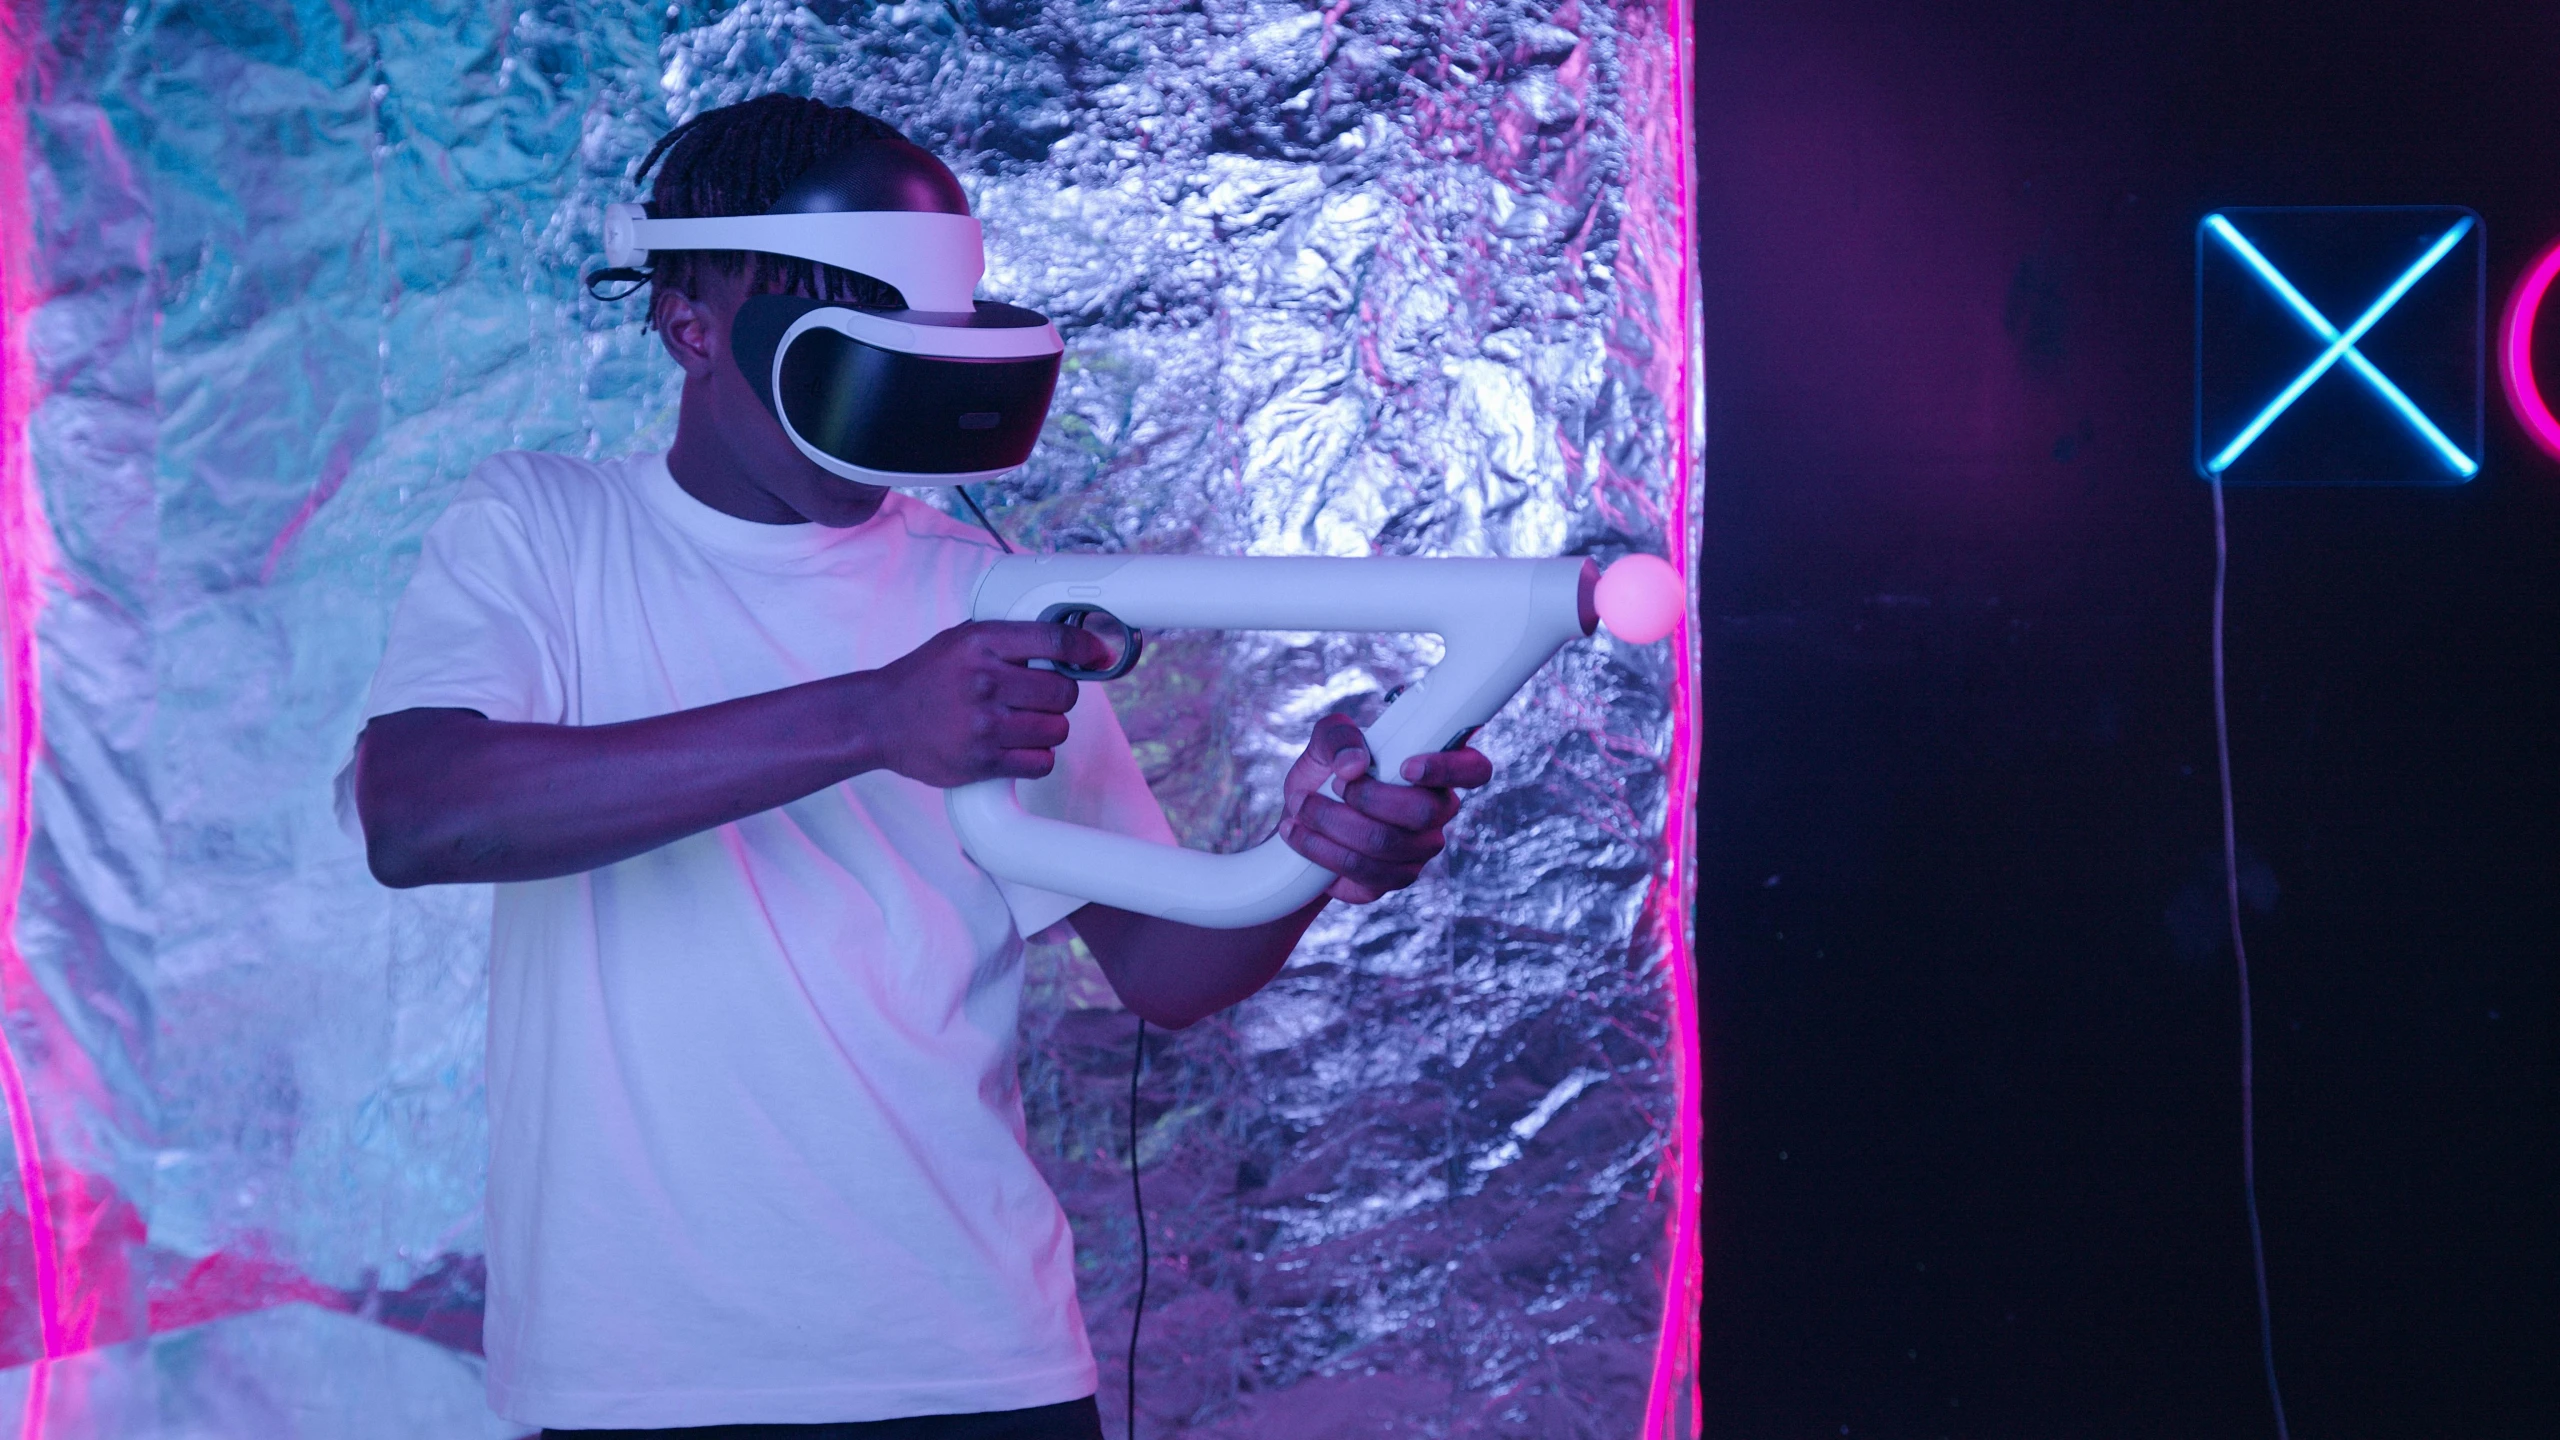 a man in a white shirt holding a video game controller, a hologram, inspired by David LaChapelle, unsplash, interactive art, : kanye west wearing vr goggles, closed limbo room, shot with sony alpha 1 camera, purple ambient light